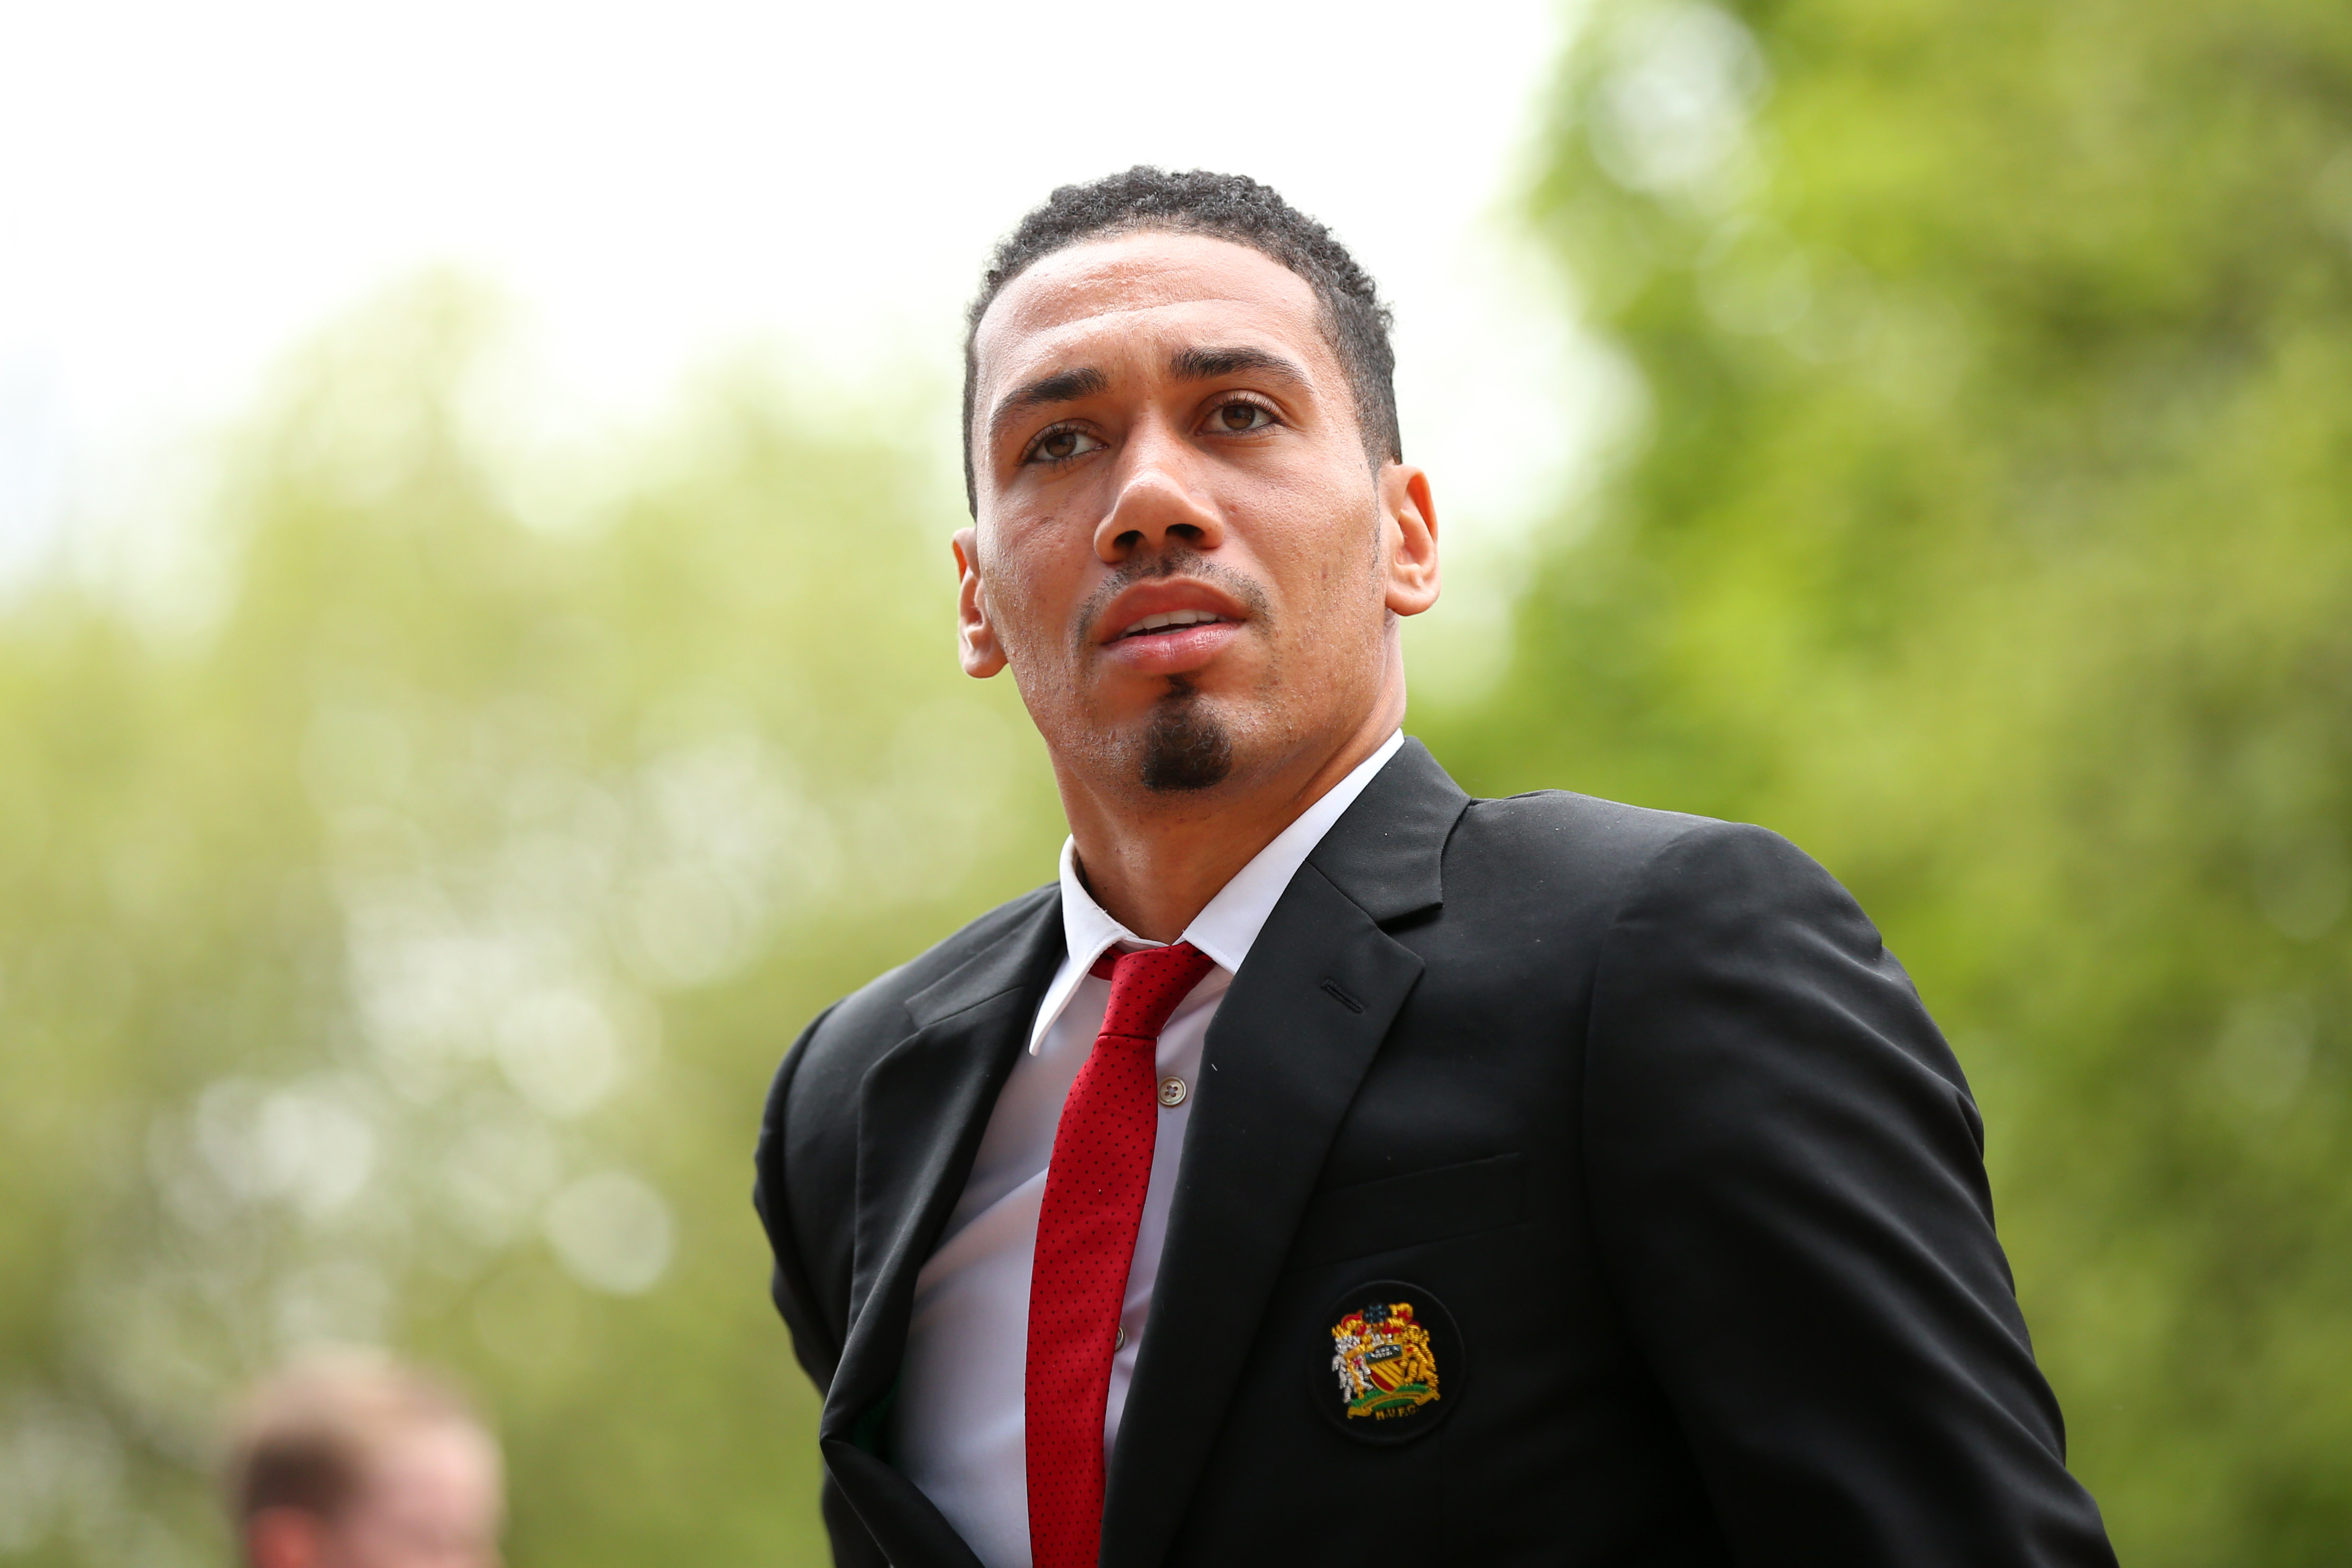 HUDDERSFIELD, ENGLAND - MAY 05:  Chris Smalling of Manchester United arrives  prior to the Premier League match between Huddersfield Town and Manchester United at John Smith's Stadium on May 05, 2019 in Huddersfield, United Kingdom. (Photo by Alex Livesey/Getty Images)